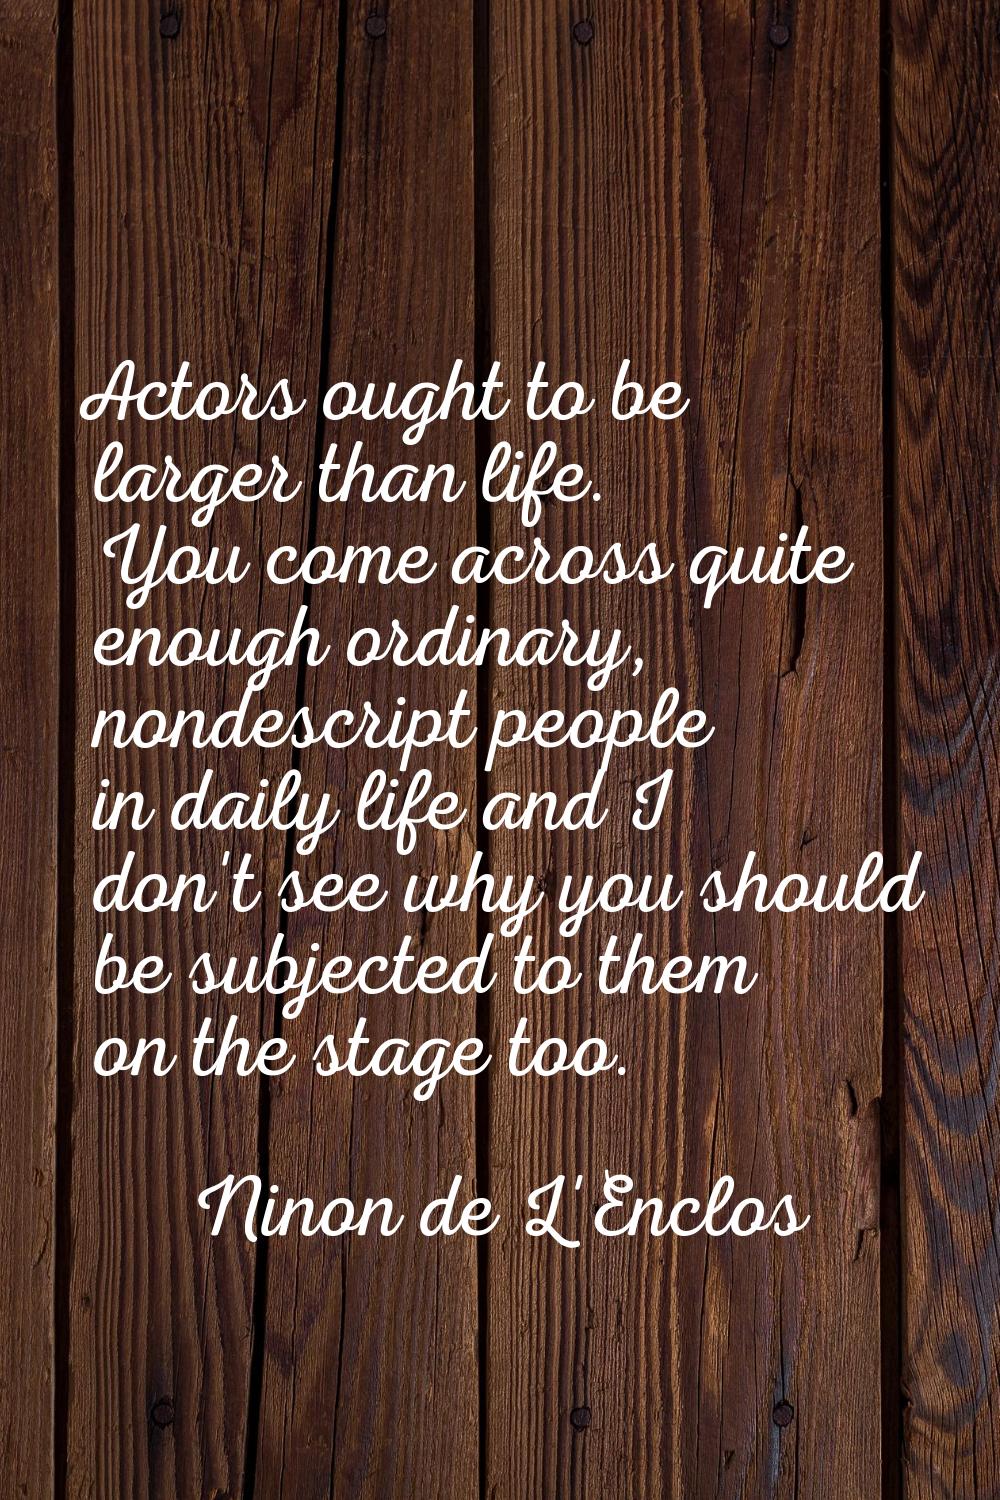 Actors ought to be larger than life. You come across quite enough ordinary, nondescript people in d